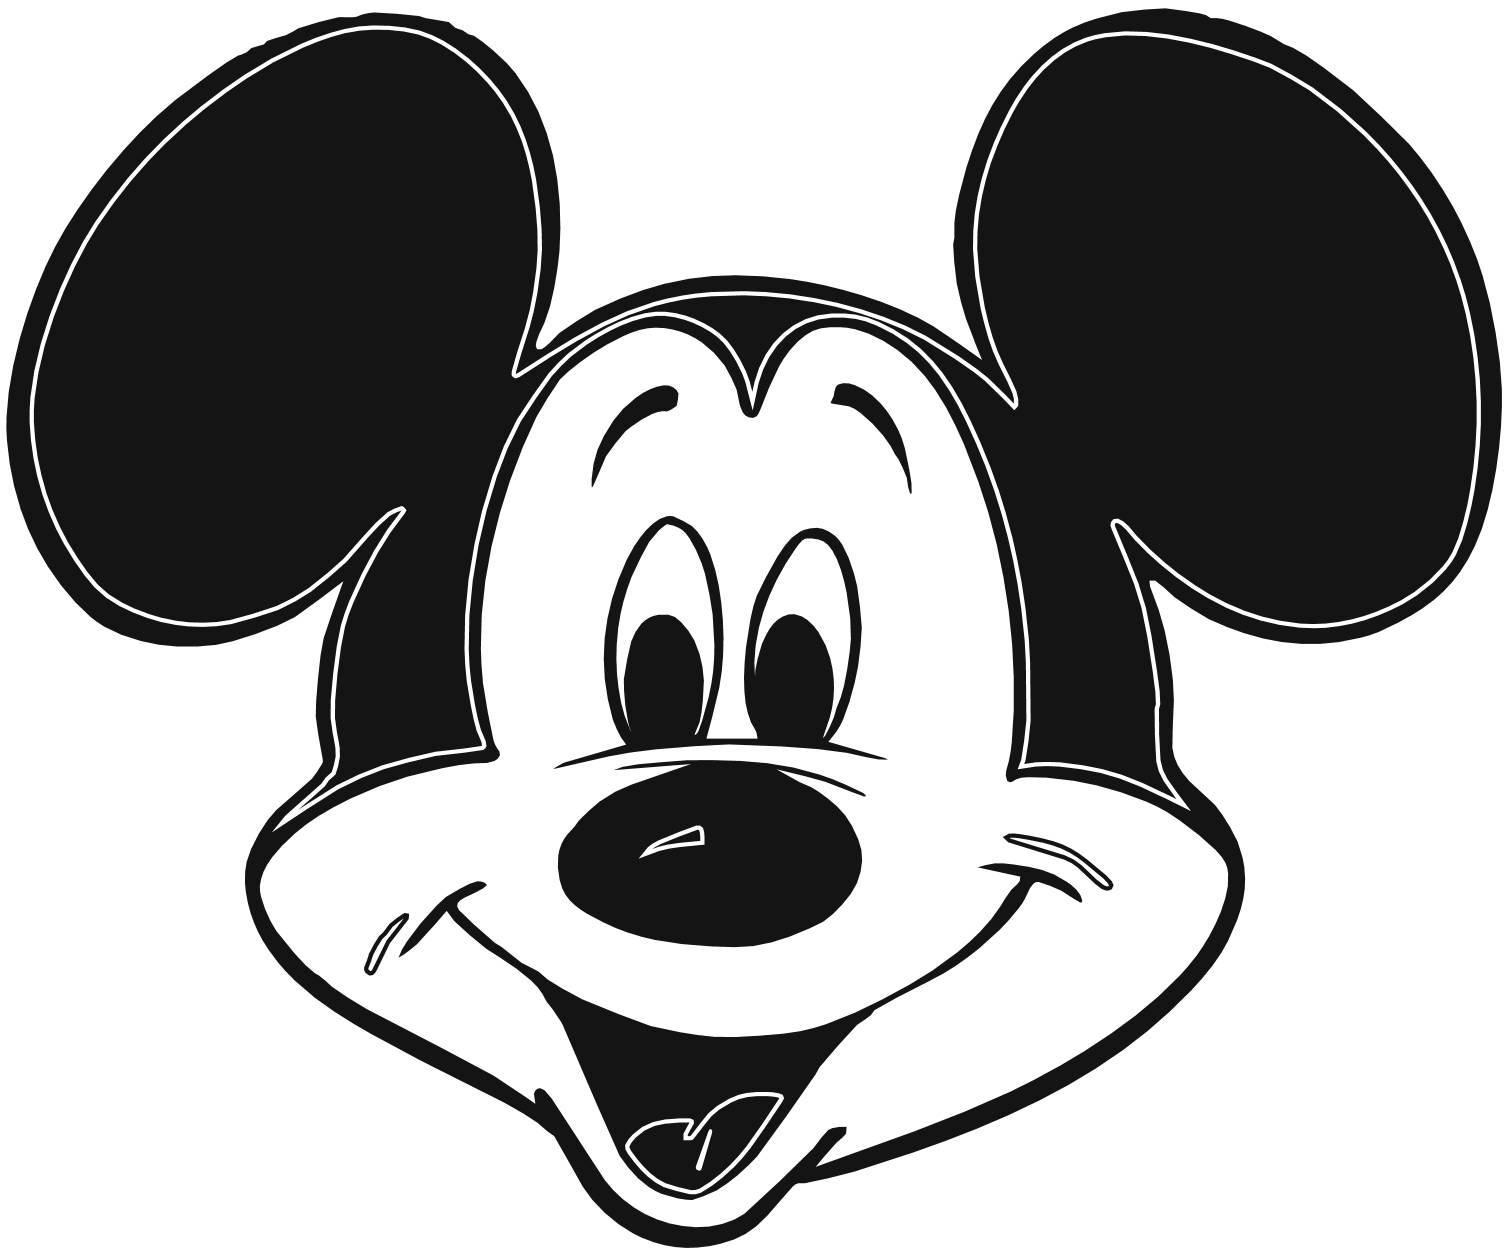 Mickey Mouse Cartoon 1260 HD Wallpaper In Cartoons Mouse Head Angry HD Wallpaper